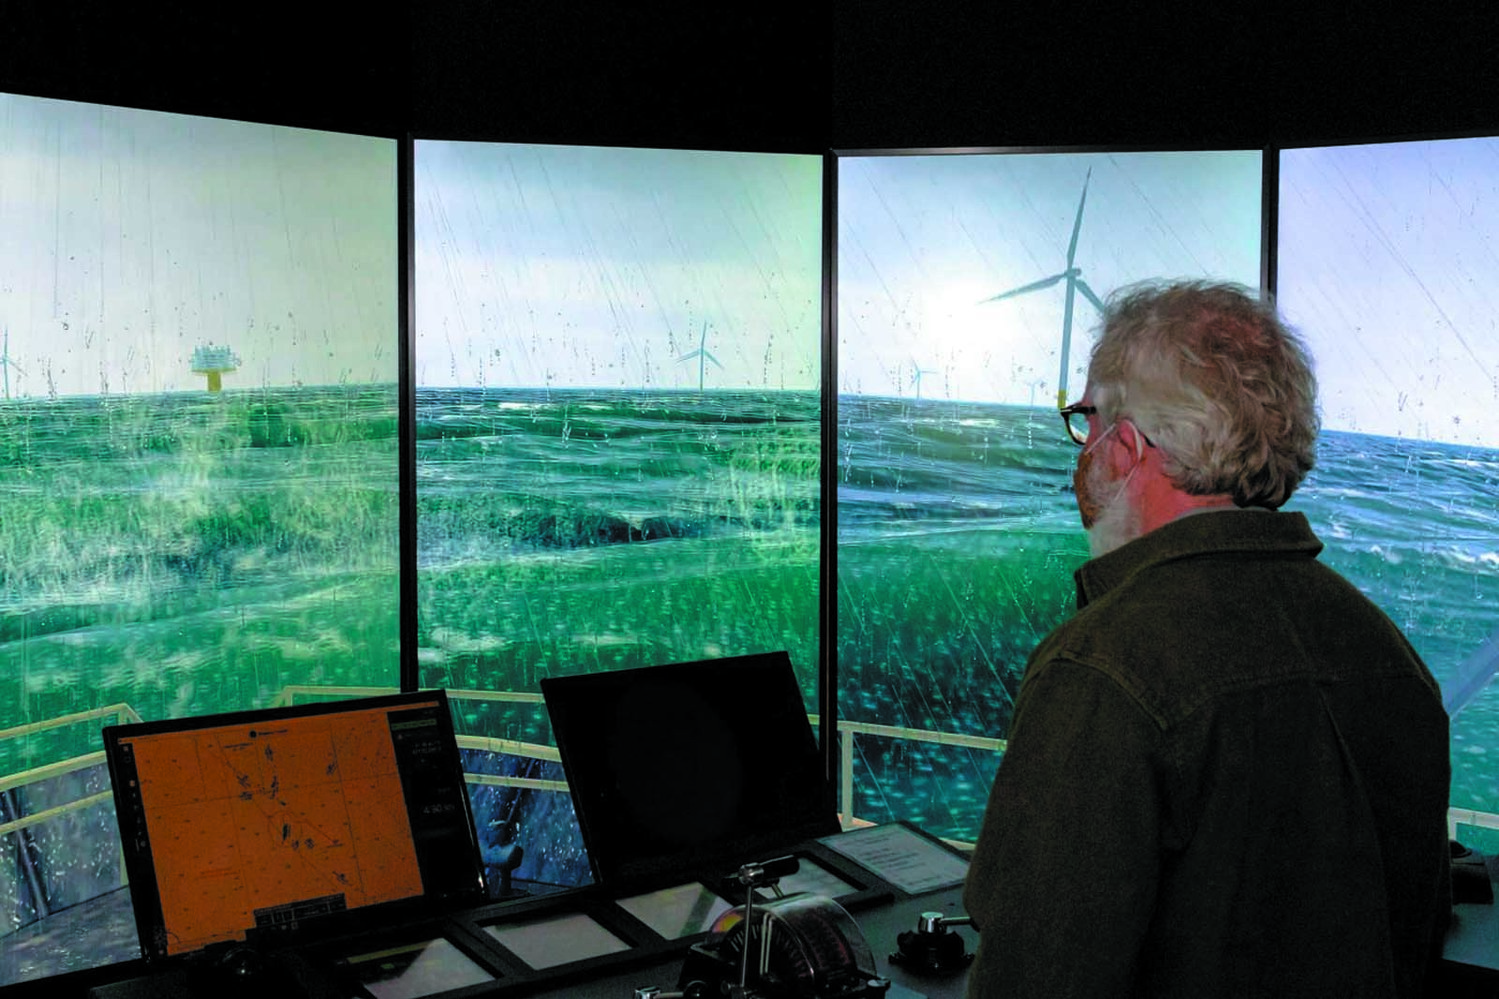 PILOTING IN WIND FARM: Todd Corayer, fishing guide and fishing writer, tries his hand at piloting through a wind farm in high seas, wind and rain at the Revolution wind farm simulator. (Submitted photos) Capt. Patrick Cassidy